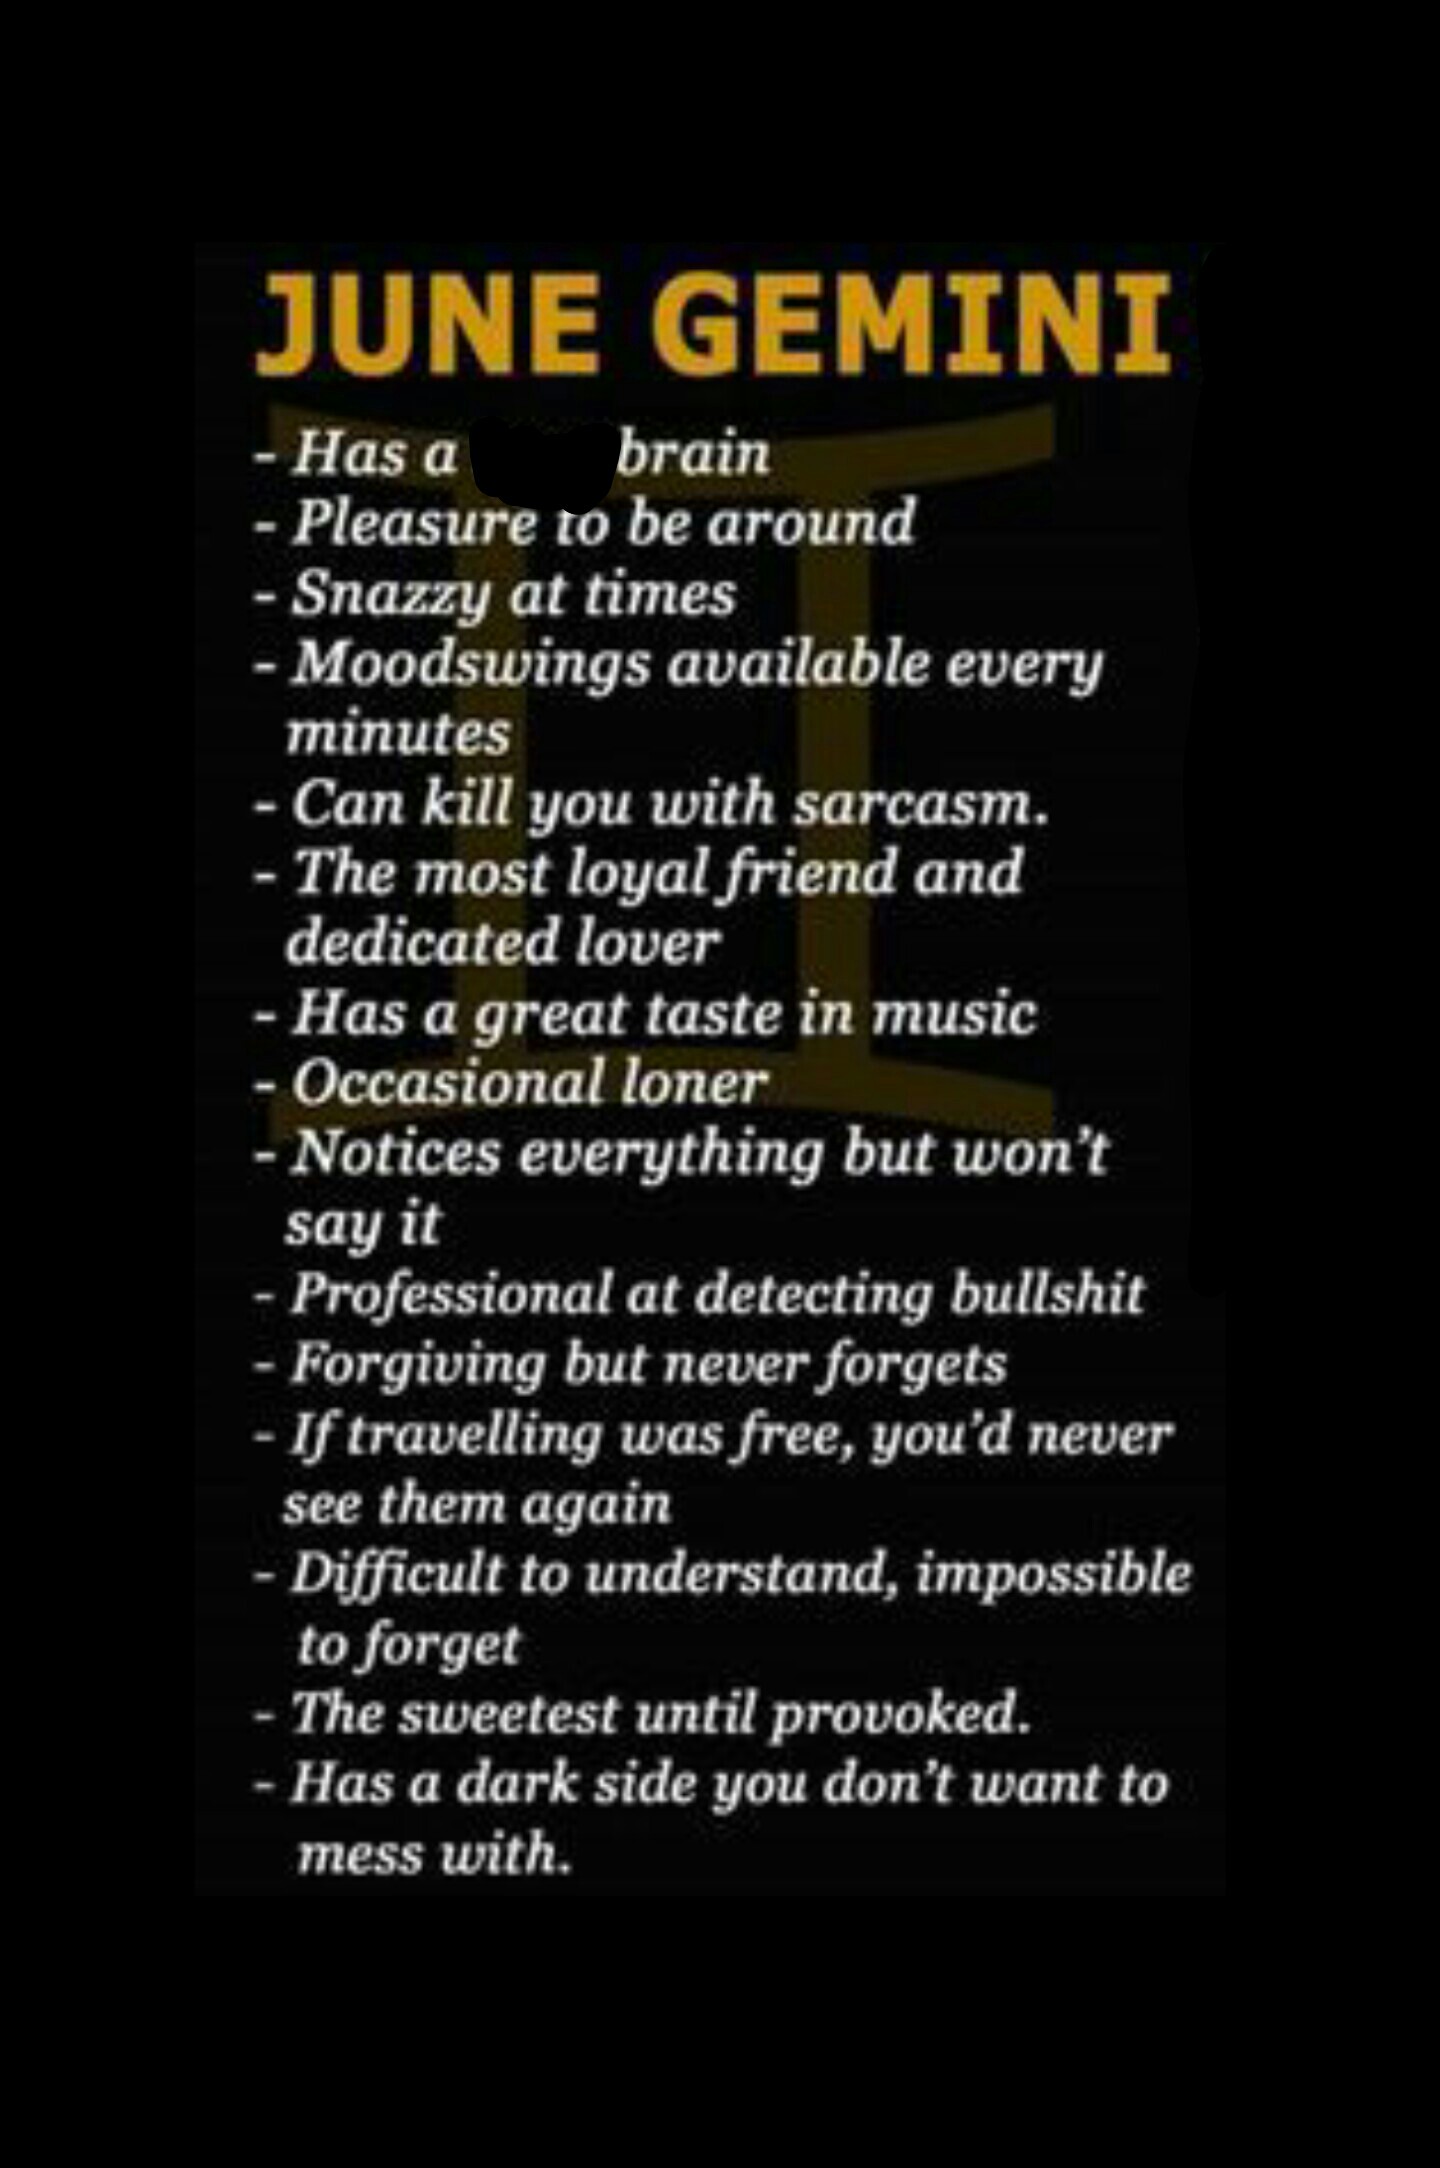 
I mean I'm not gonna deny it. Ormshaw how many of these would you say are true? 